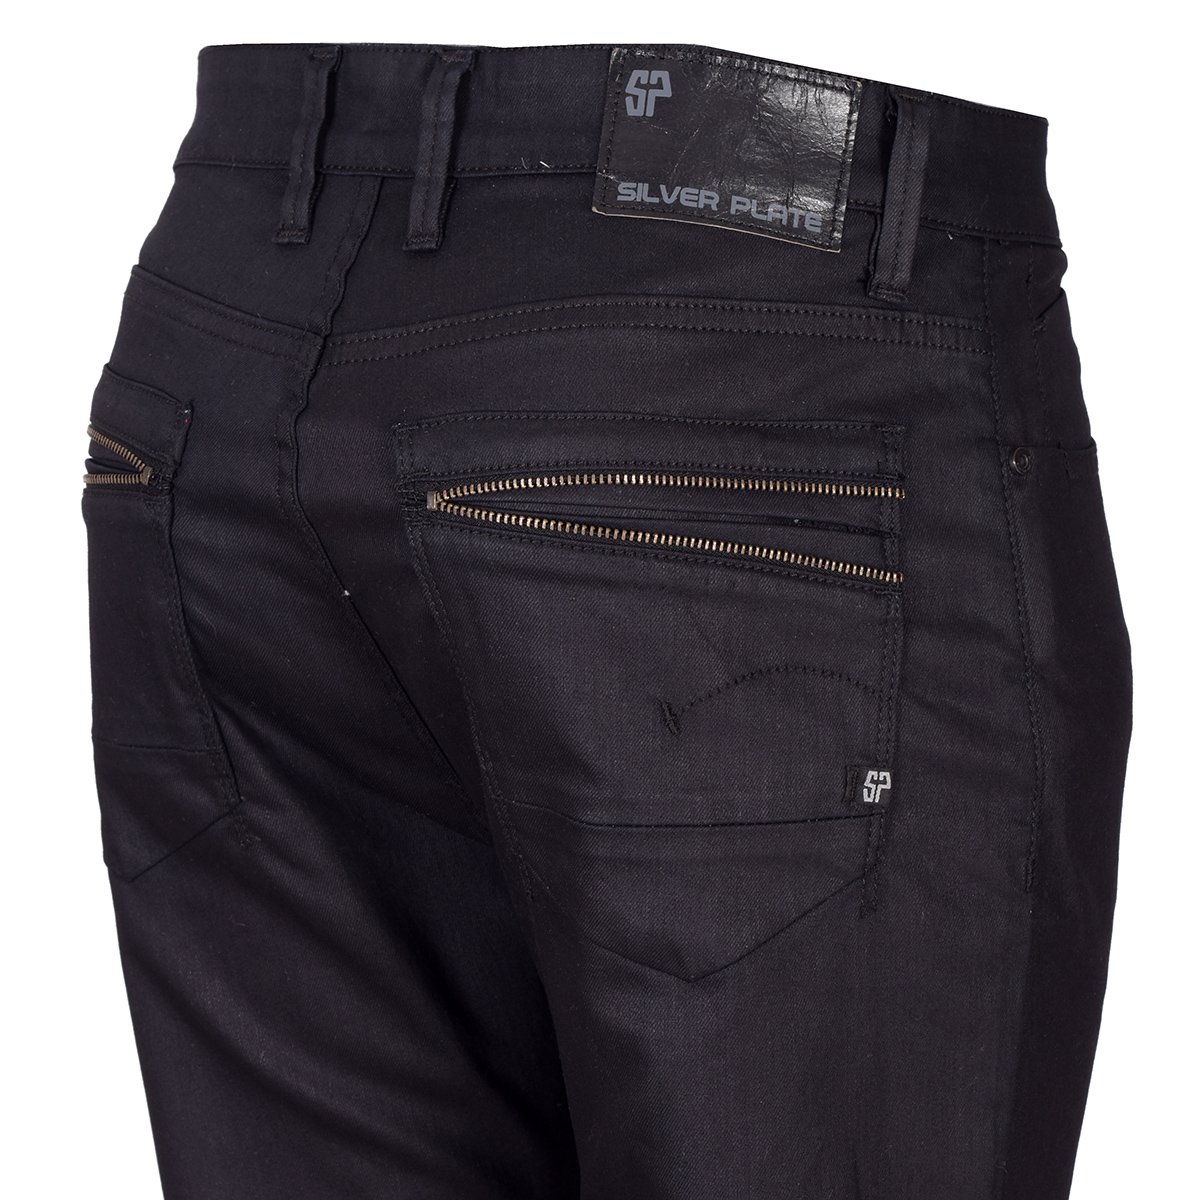 Jeans Color Negro Silver Plate